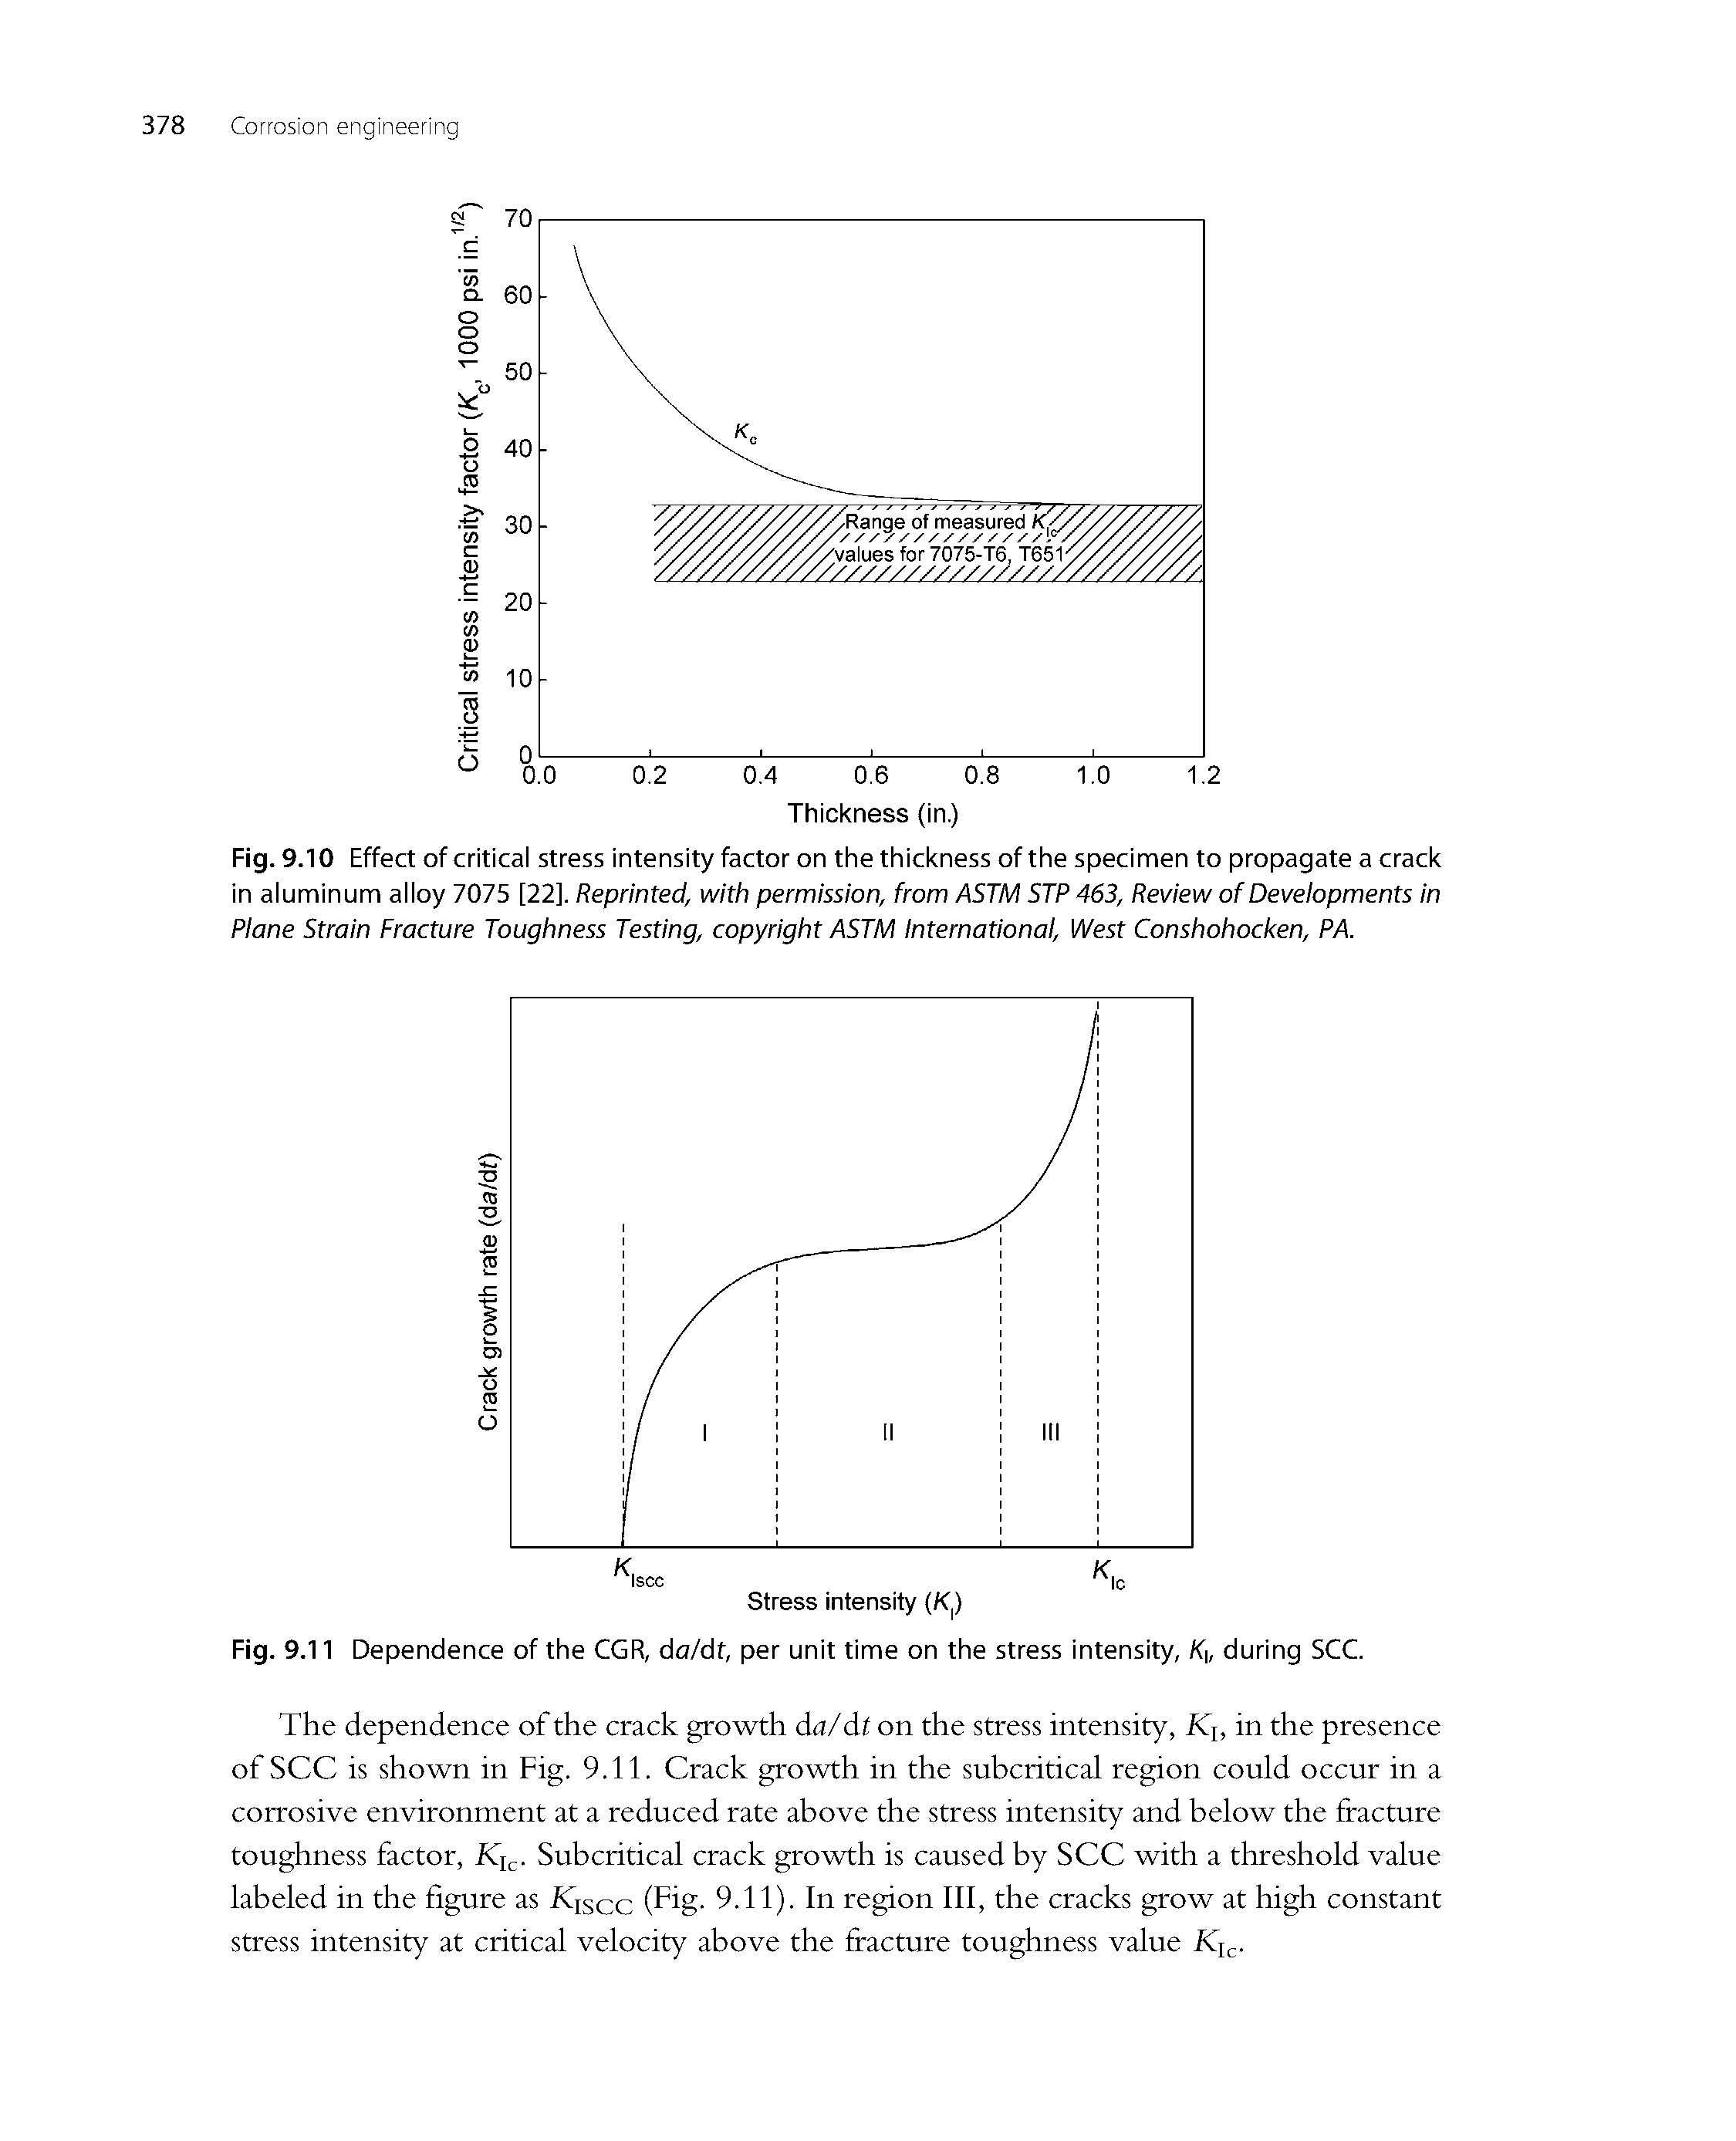 Fig. 9.10 Effect of critical stress intensity factor on the thickness of the specimen to propagate a crack in aluminum alloy 7075 [22]. Reprinted, with permission, from ASTM STP 463, Review of Developments in Plane Strain Fracture Toughness Testing, copyright ASTM International, West Conshohocken, PA.